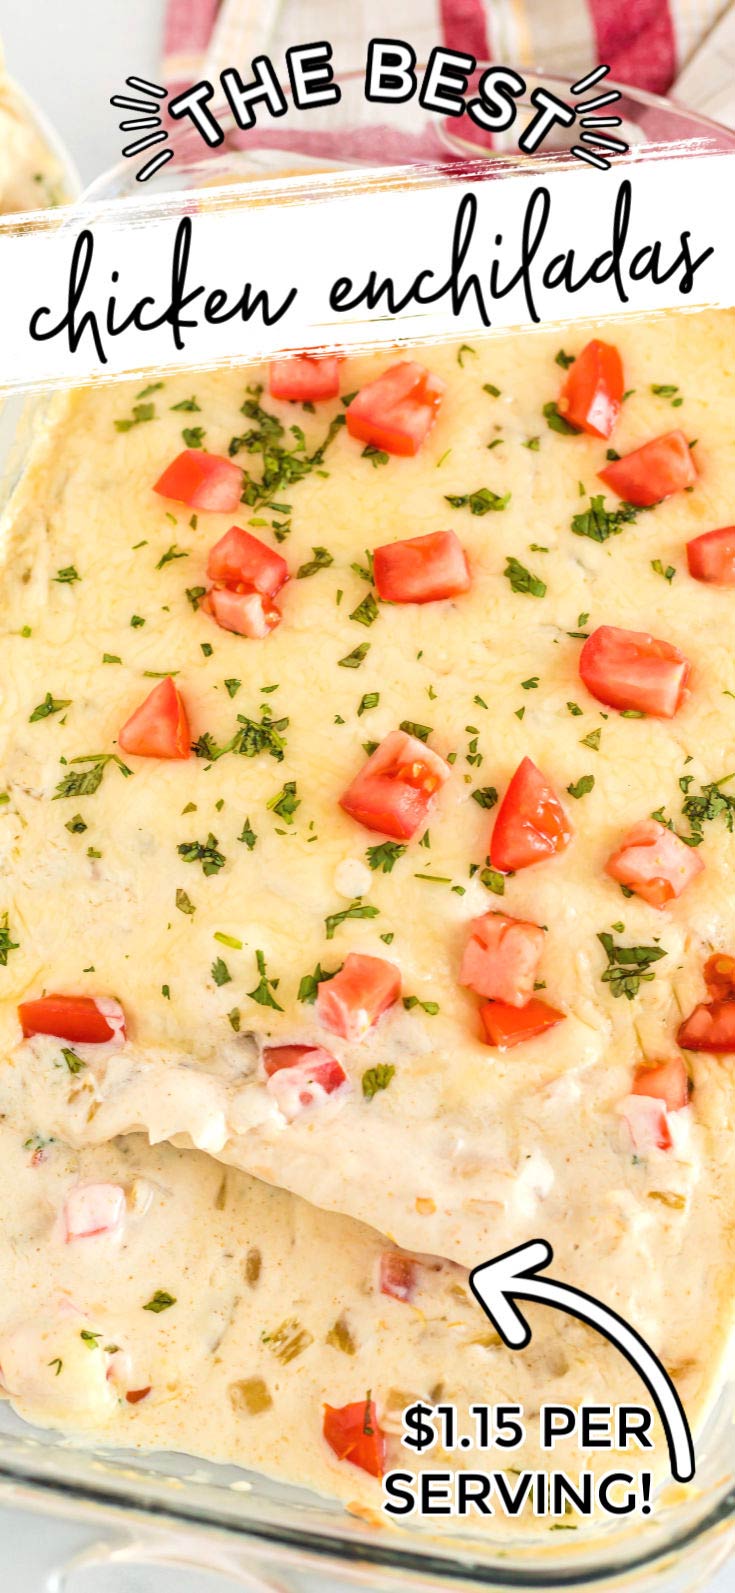 This creamy Chicken Enchilada recipe is some serious comfort food! The enchiladas are filled with chicken, cheese, corn, and green chiles and covered with a green chile cream sauce (made without canned soup!). This recipe serves 8 and costs $9.21 to make. That's just $1.15 per serving.  via @foodfolksandfun